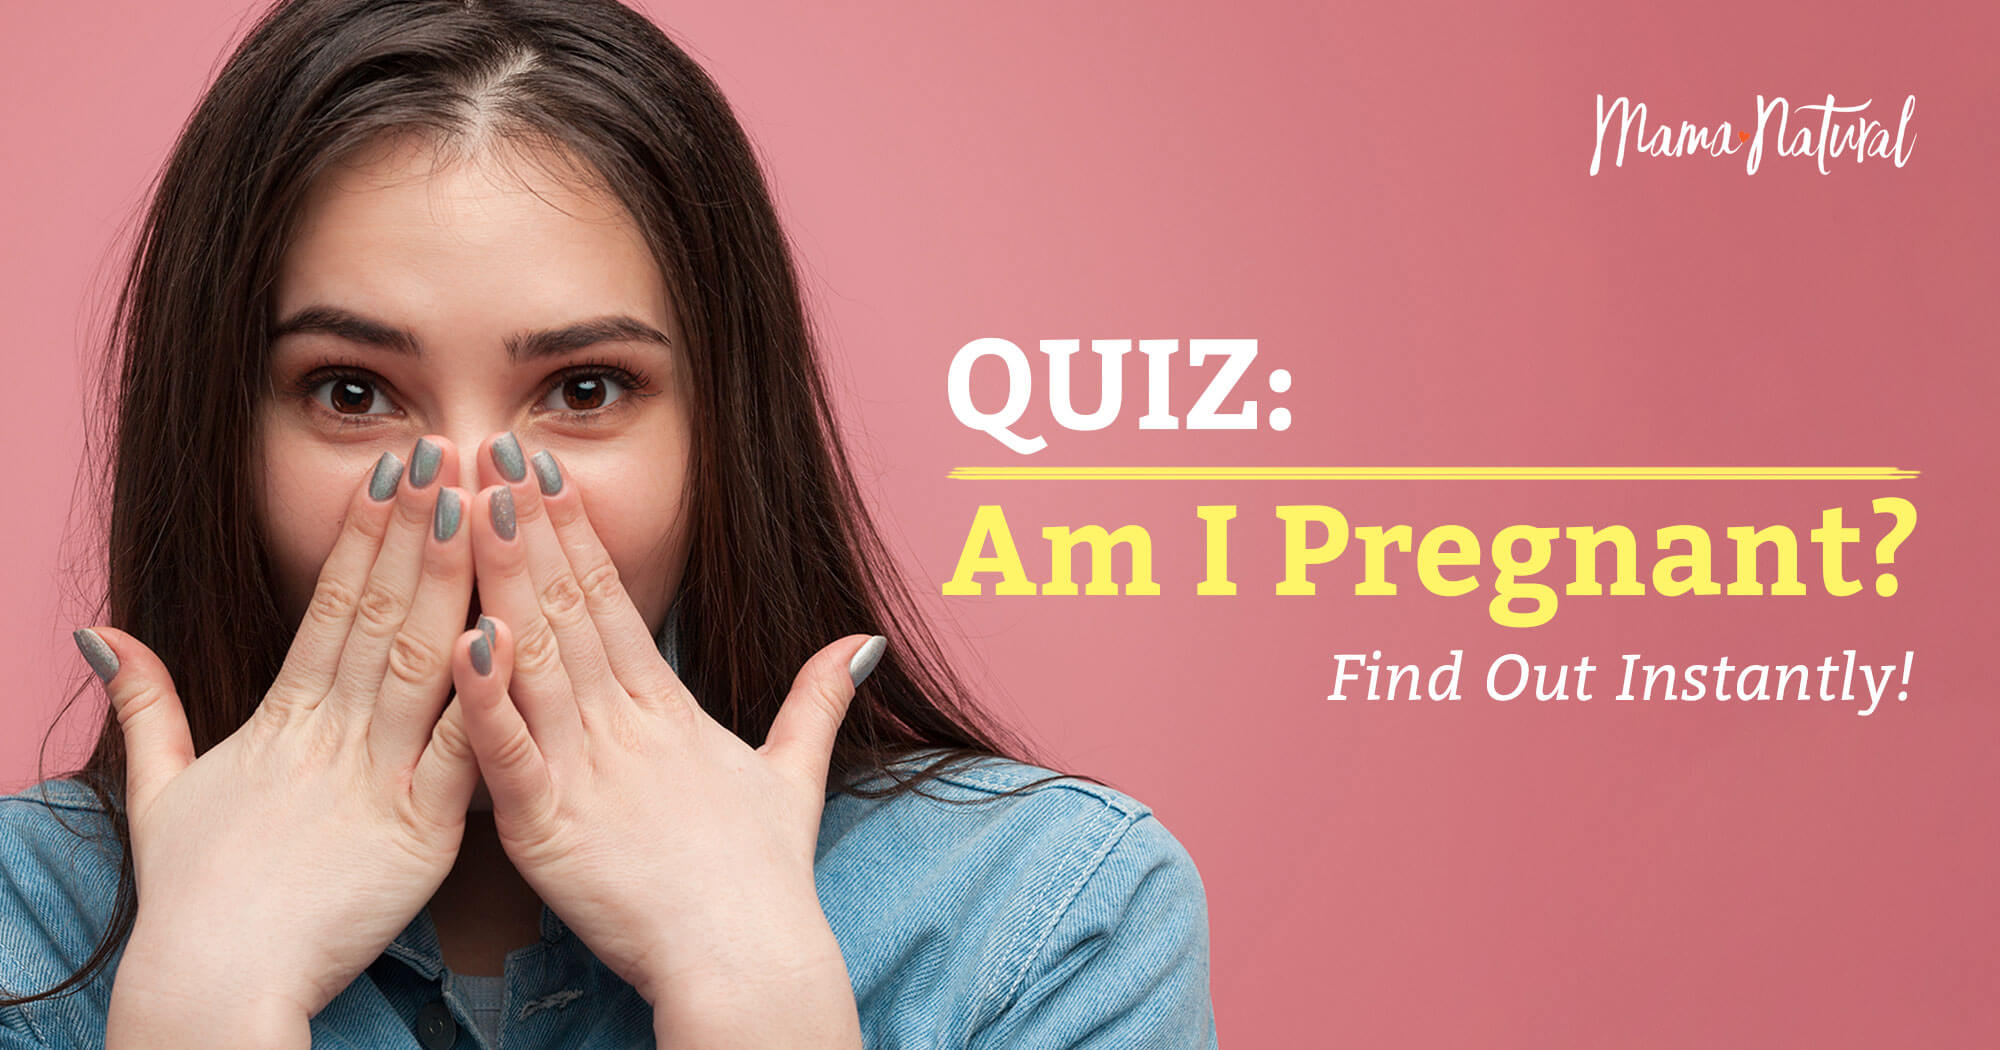 Quiz: Am I Pregnant? Find Out Instantly! - Mama Natural